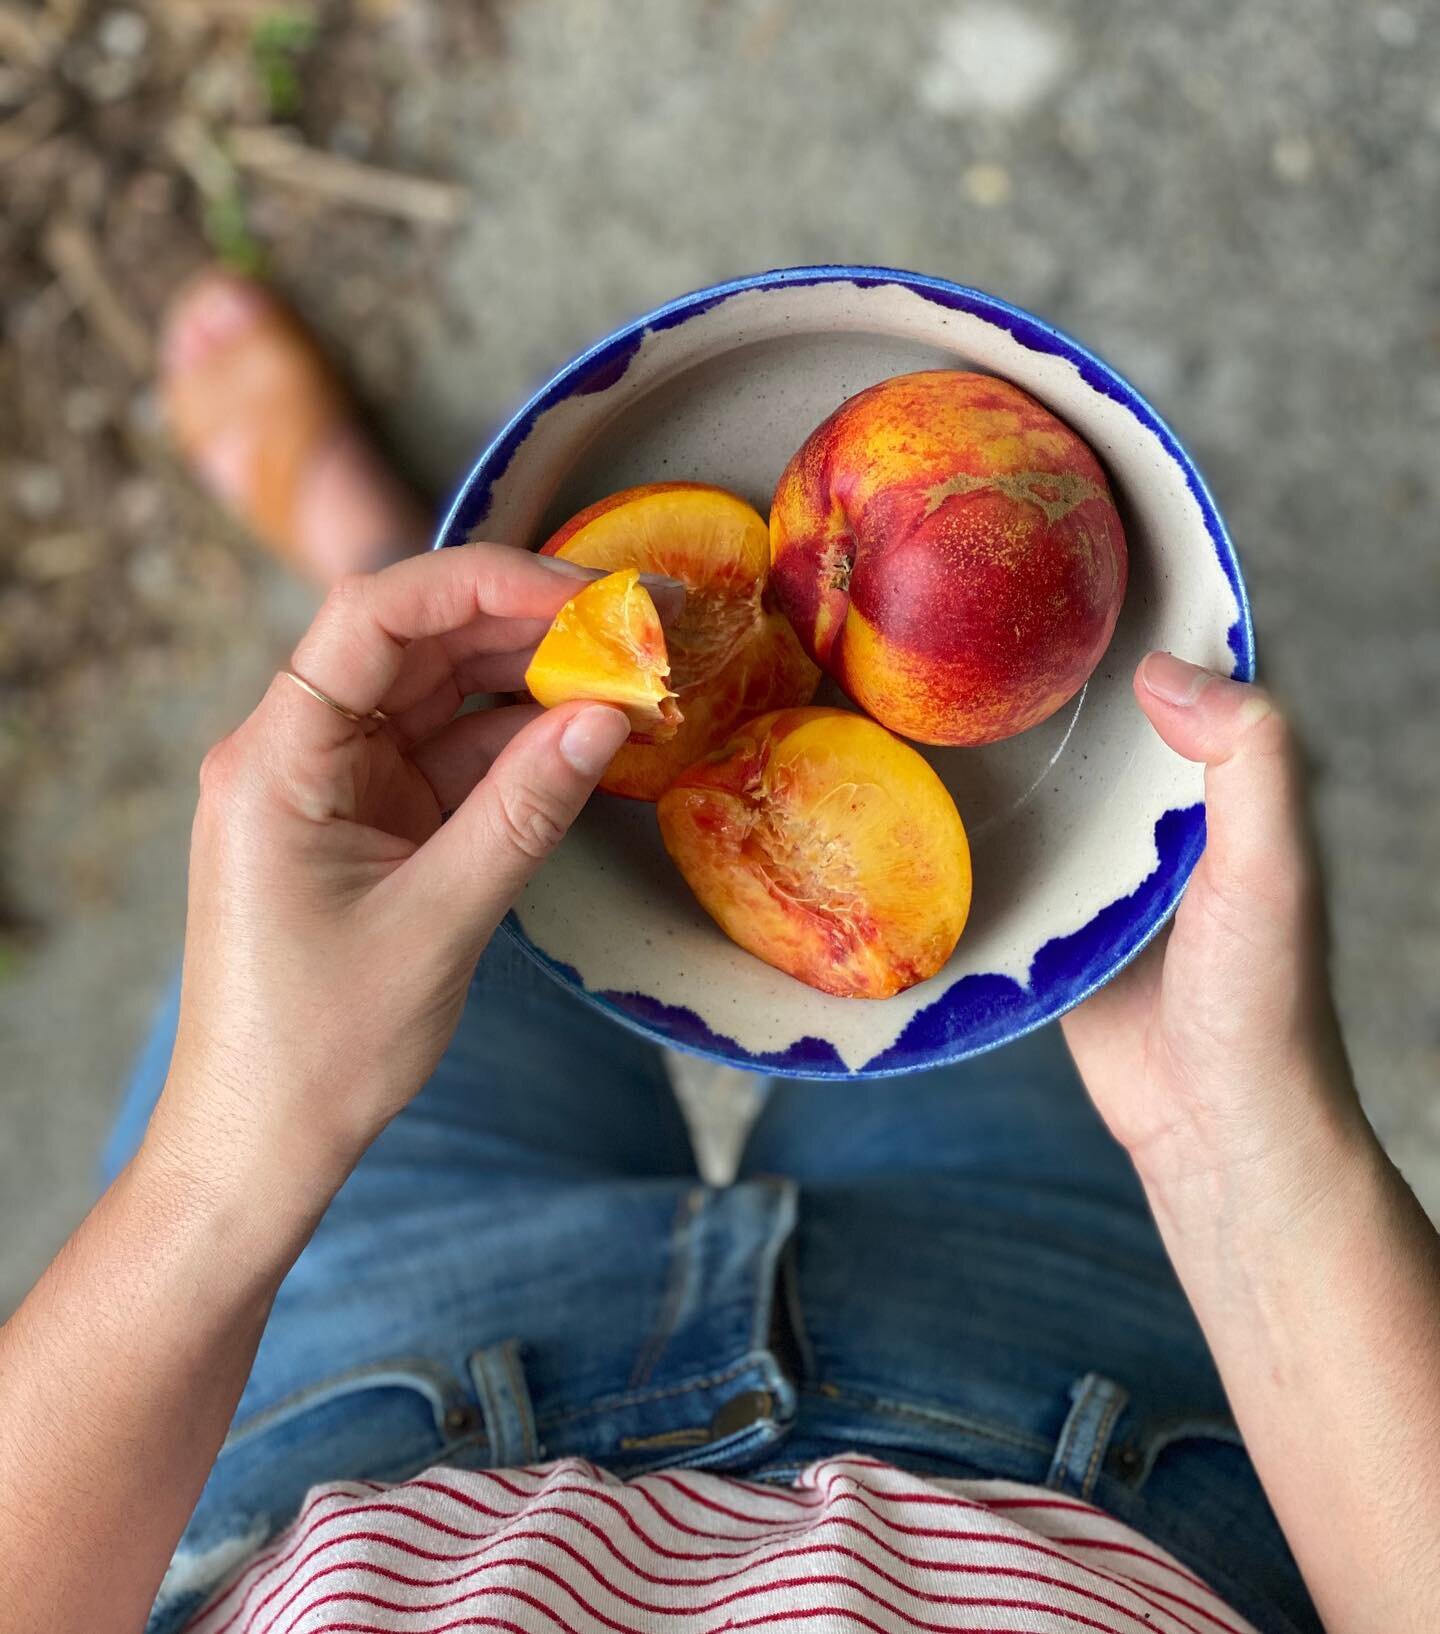 Today's farmers market bounty included these outrageously delicious nectarines from @restawhilecountry 
I think I&rsquo;ll eat the rest for dessert tonight with big dollops of whipped cream.

The Arielle Bowl pictured here is part of a set and is ava